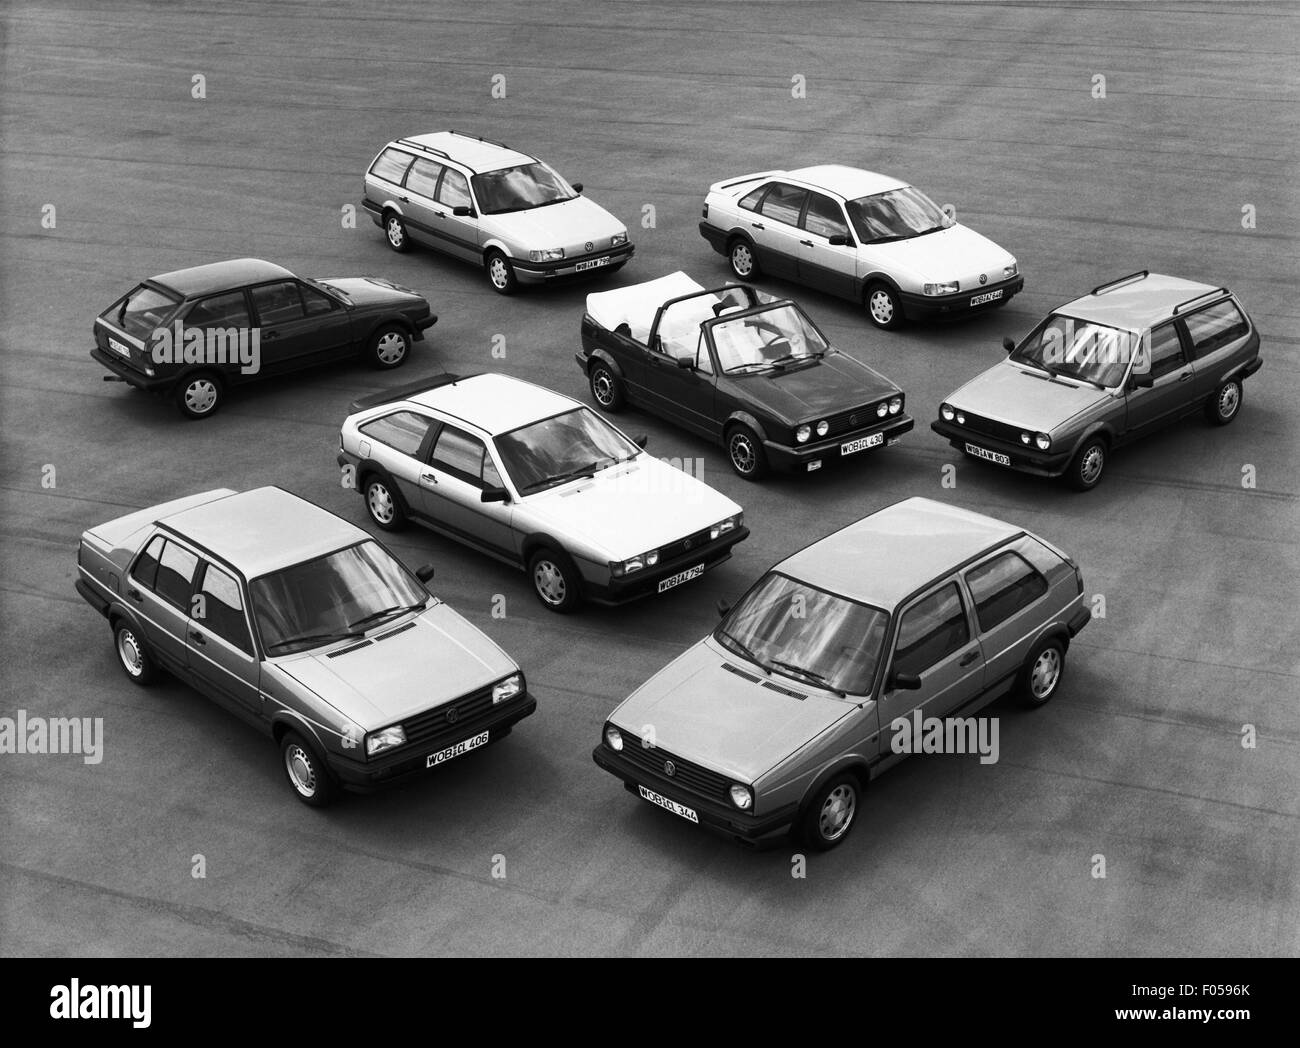 transport / transportation, car, vehicle variants, Volkswagen, VW versions, 1989, Additional-Rights-Clearences-Not Available Stock Photo